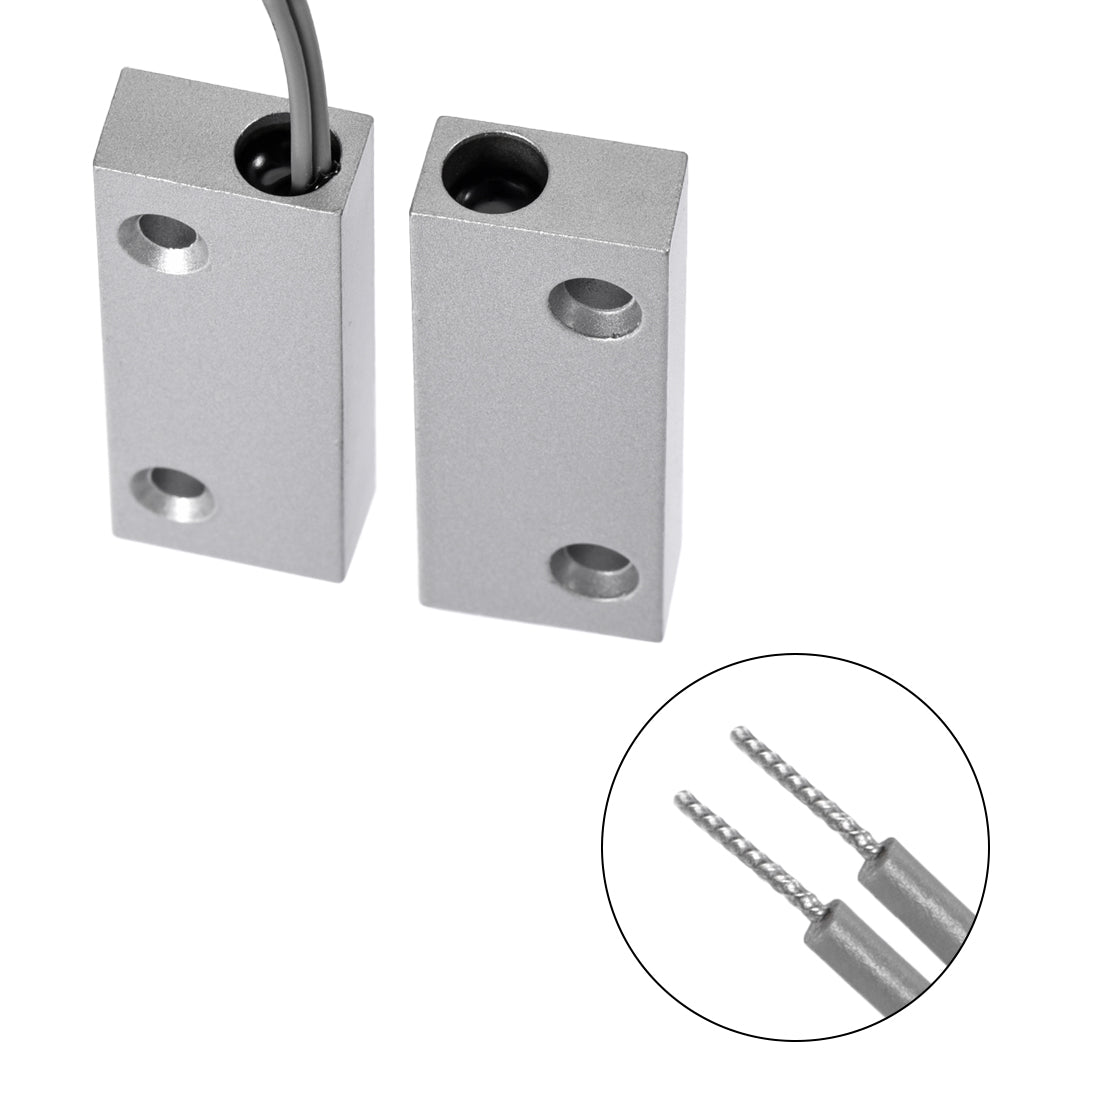 uxcell Uxcell MC-52 NC Rolling Gate Door Contact Magnetic Reed Switch 2Set